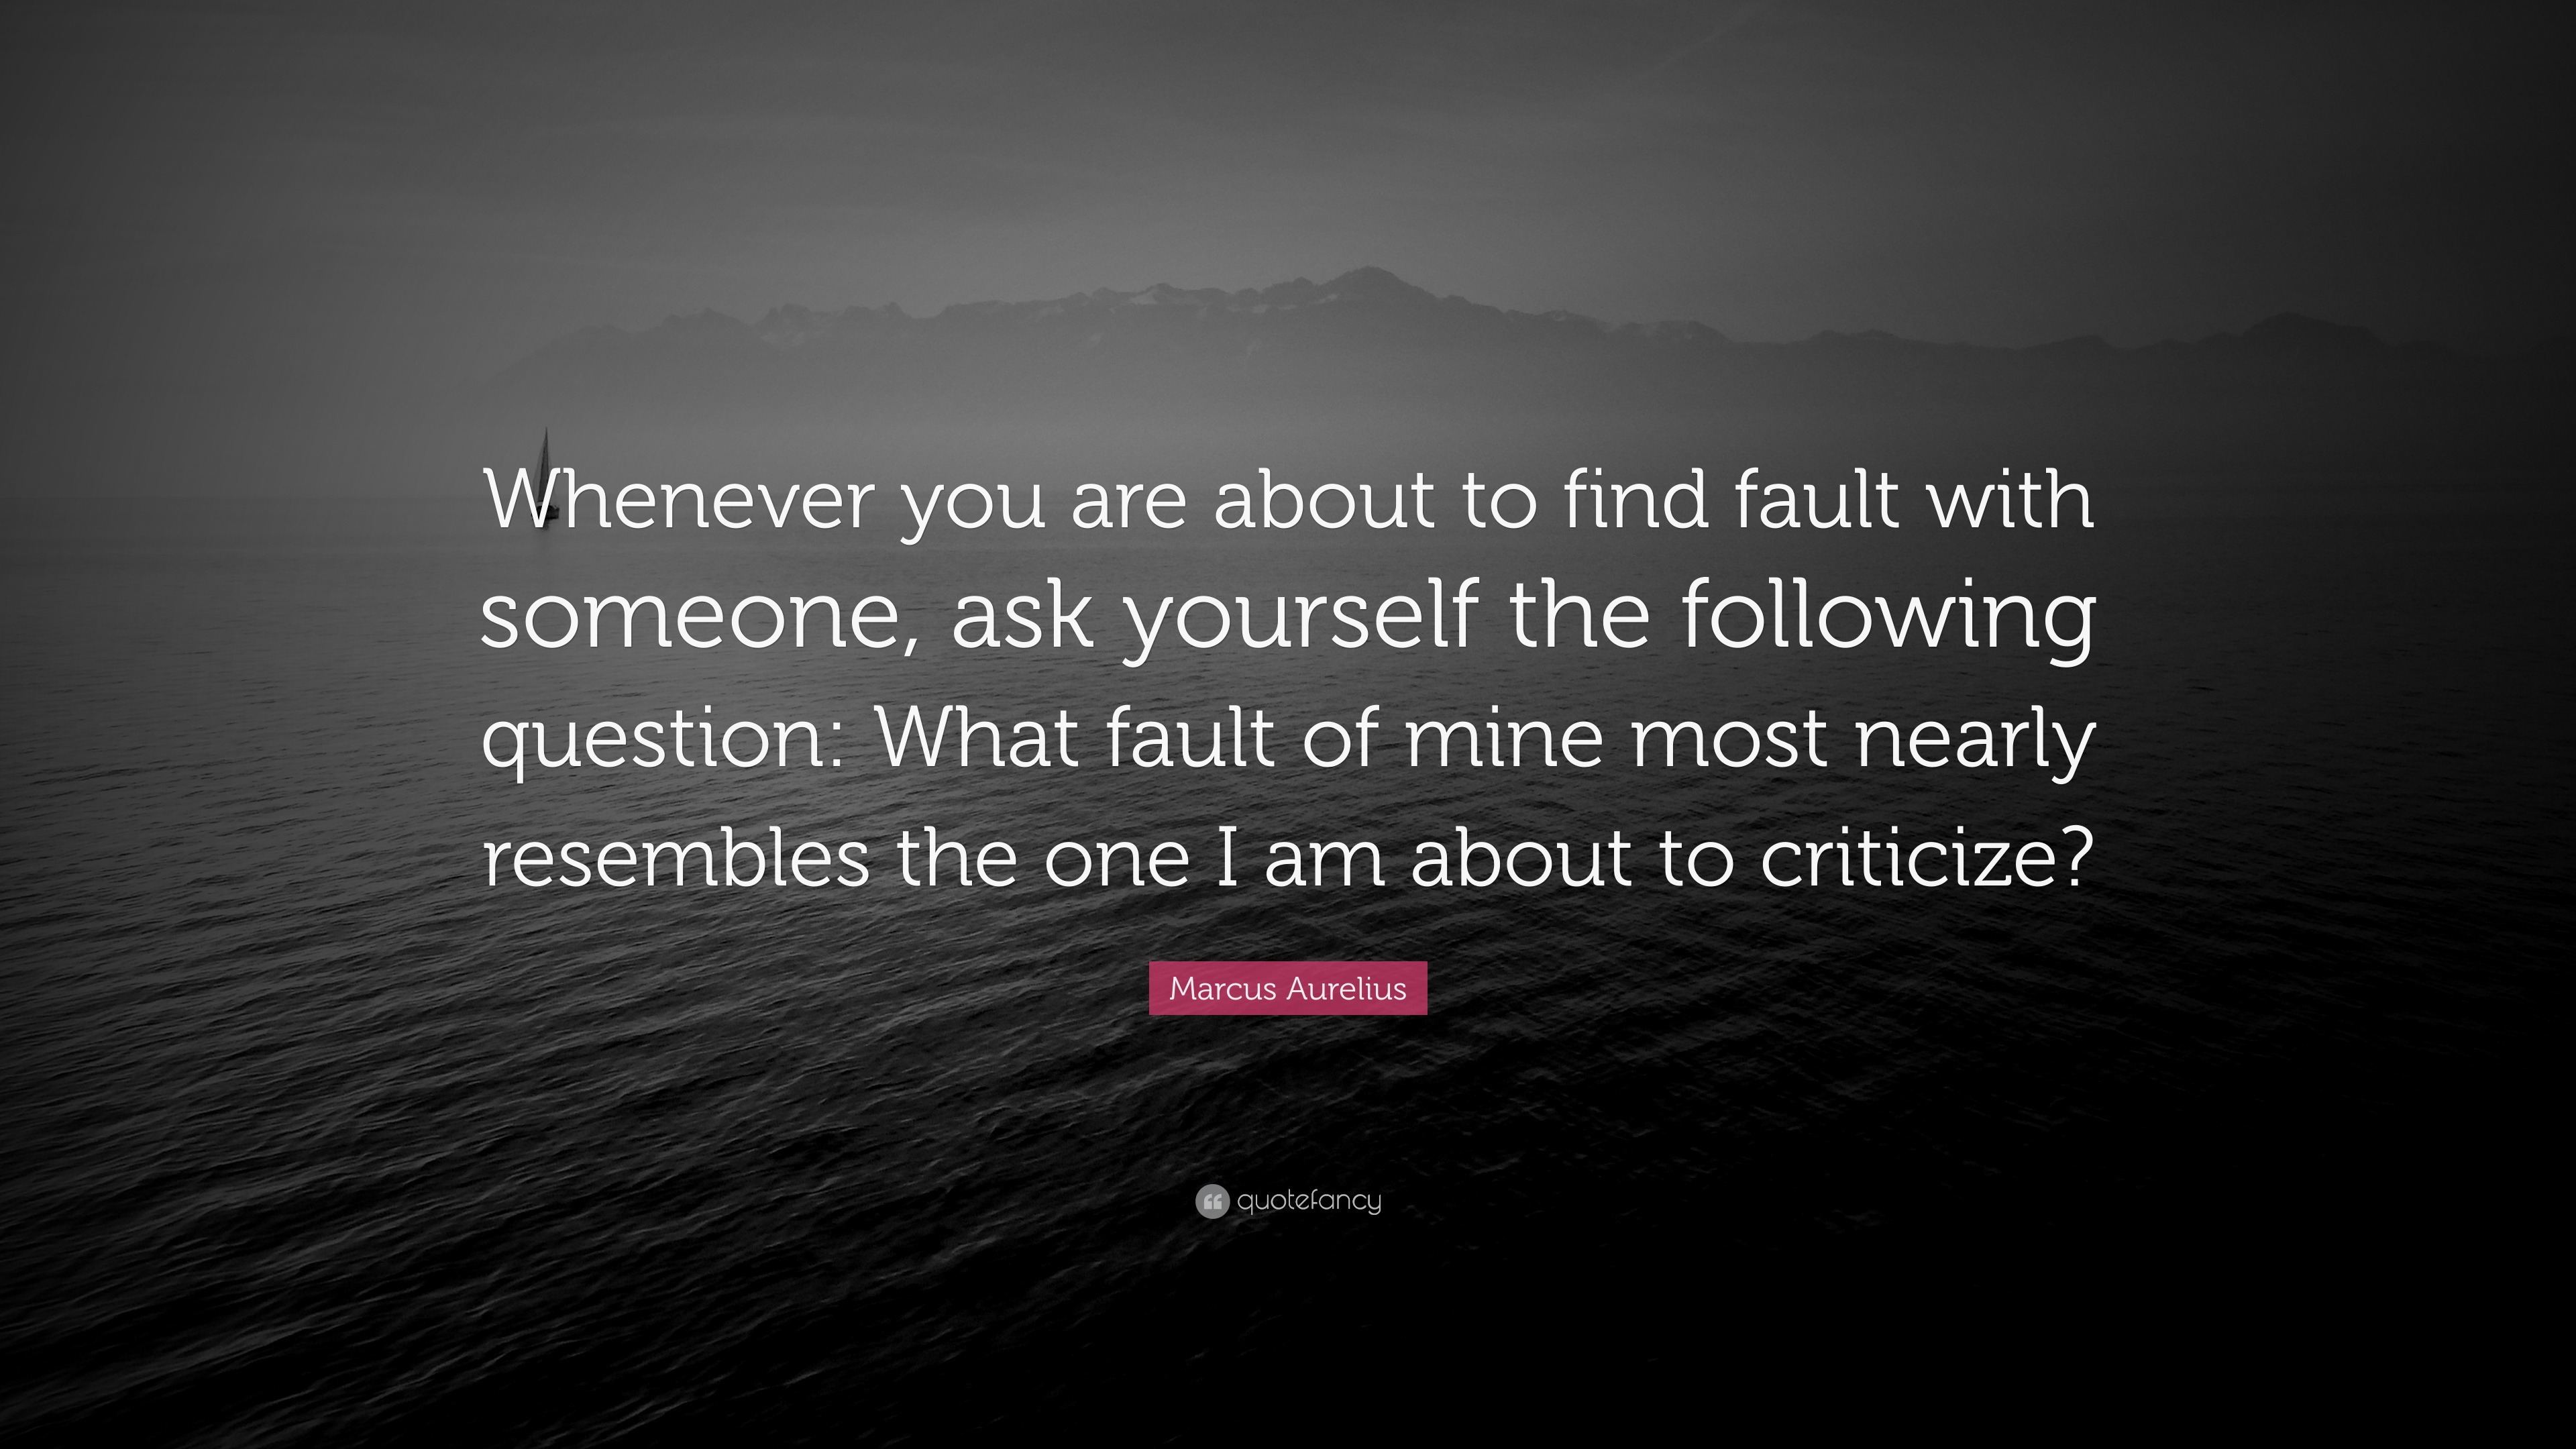 Marcus Aurelius Quote: “Whenever you are about to find fault with ...